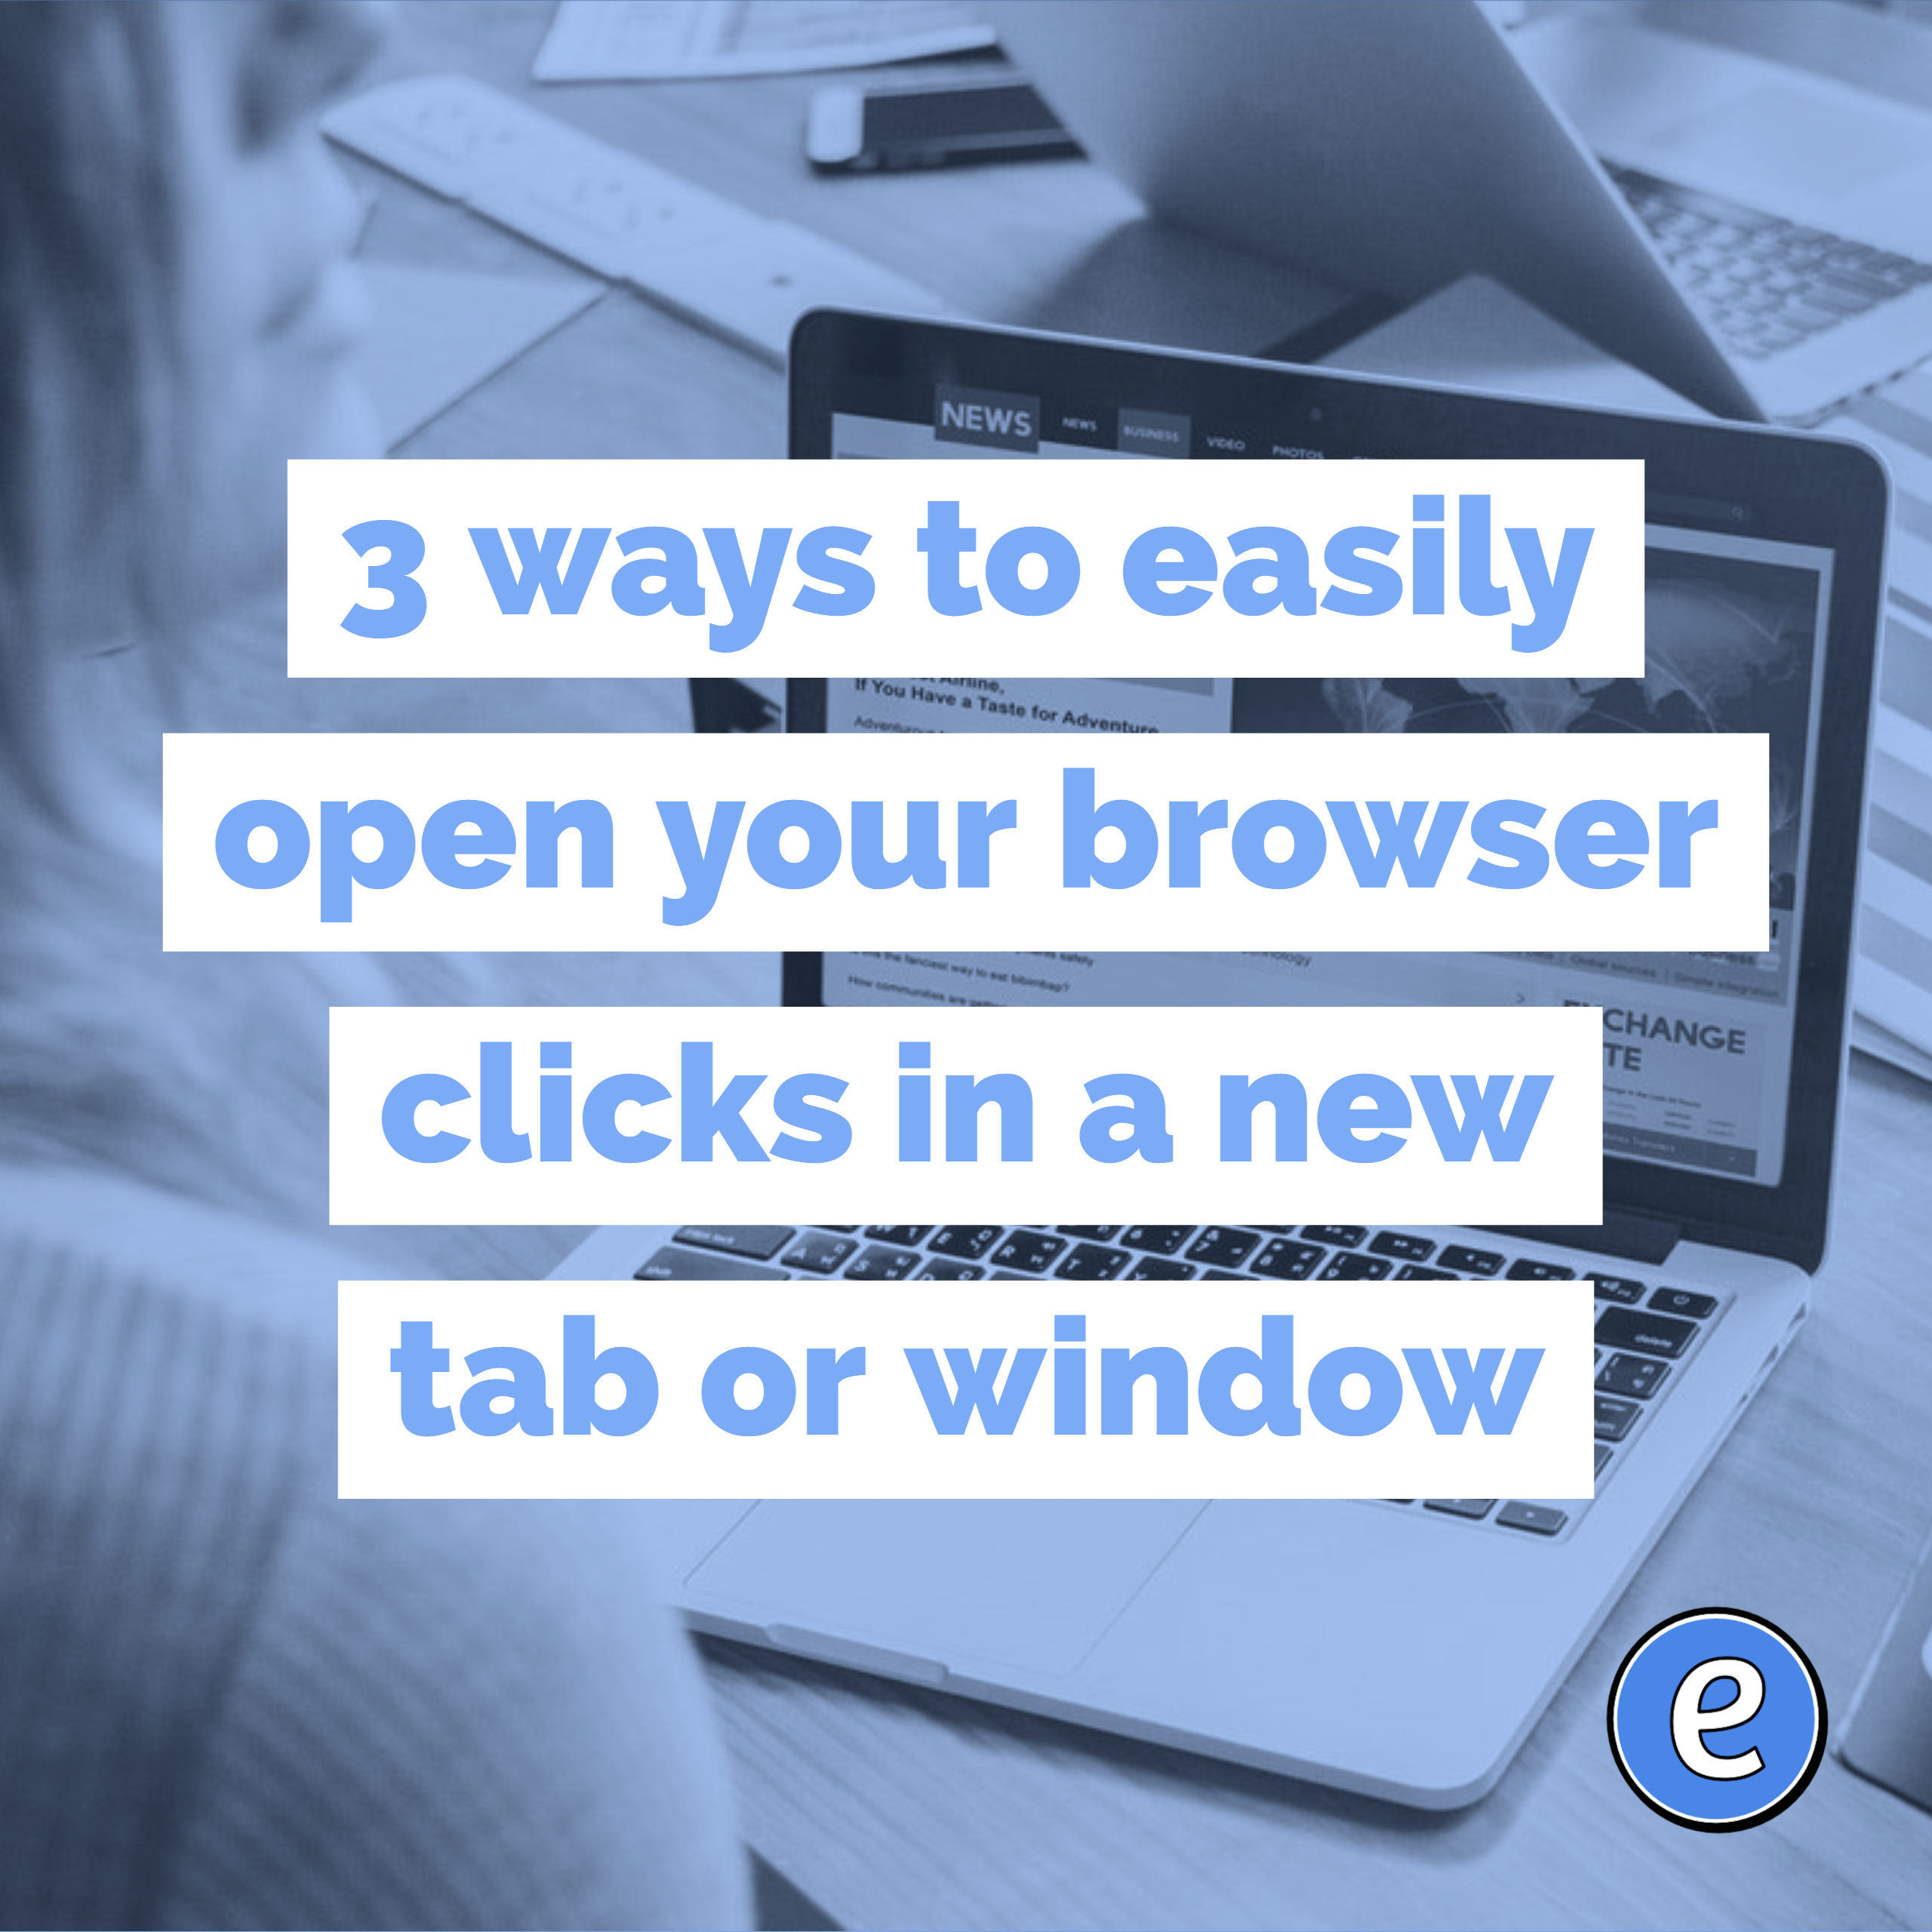 3 ways to easily open your browser clicks in a new tab or window